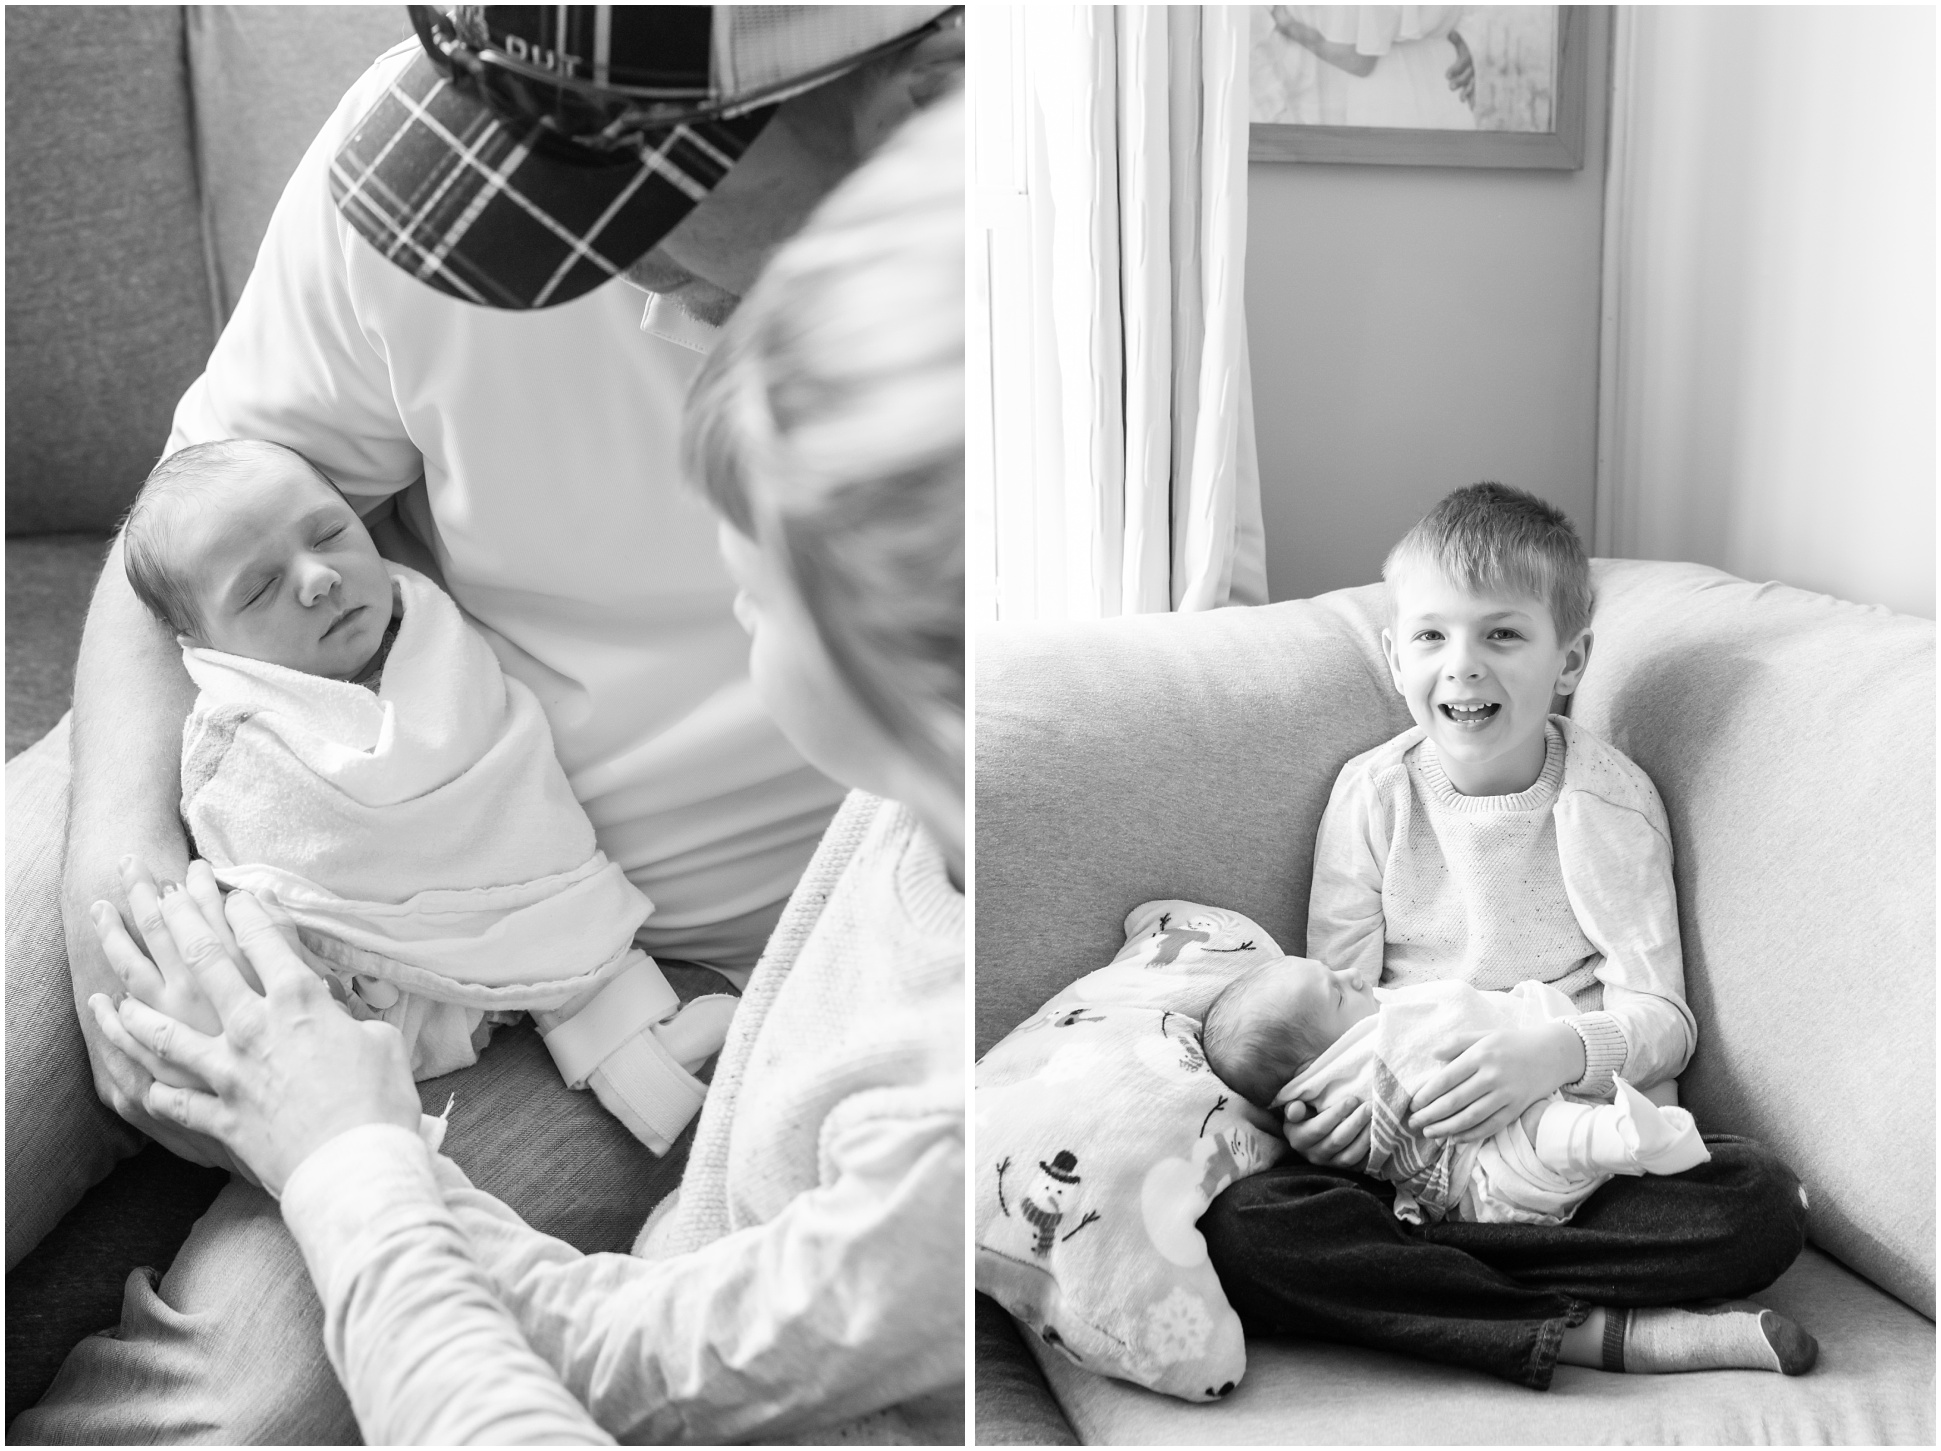 Two family photos at the McKinney Newborn Session